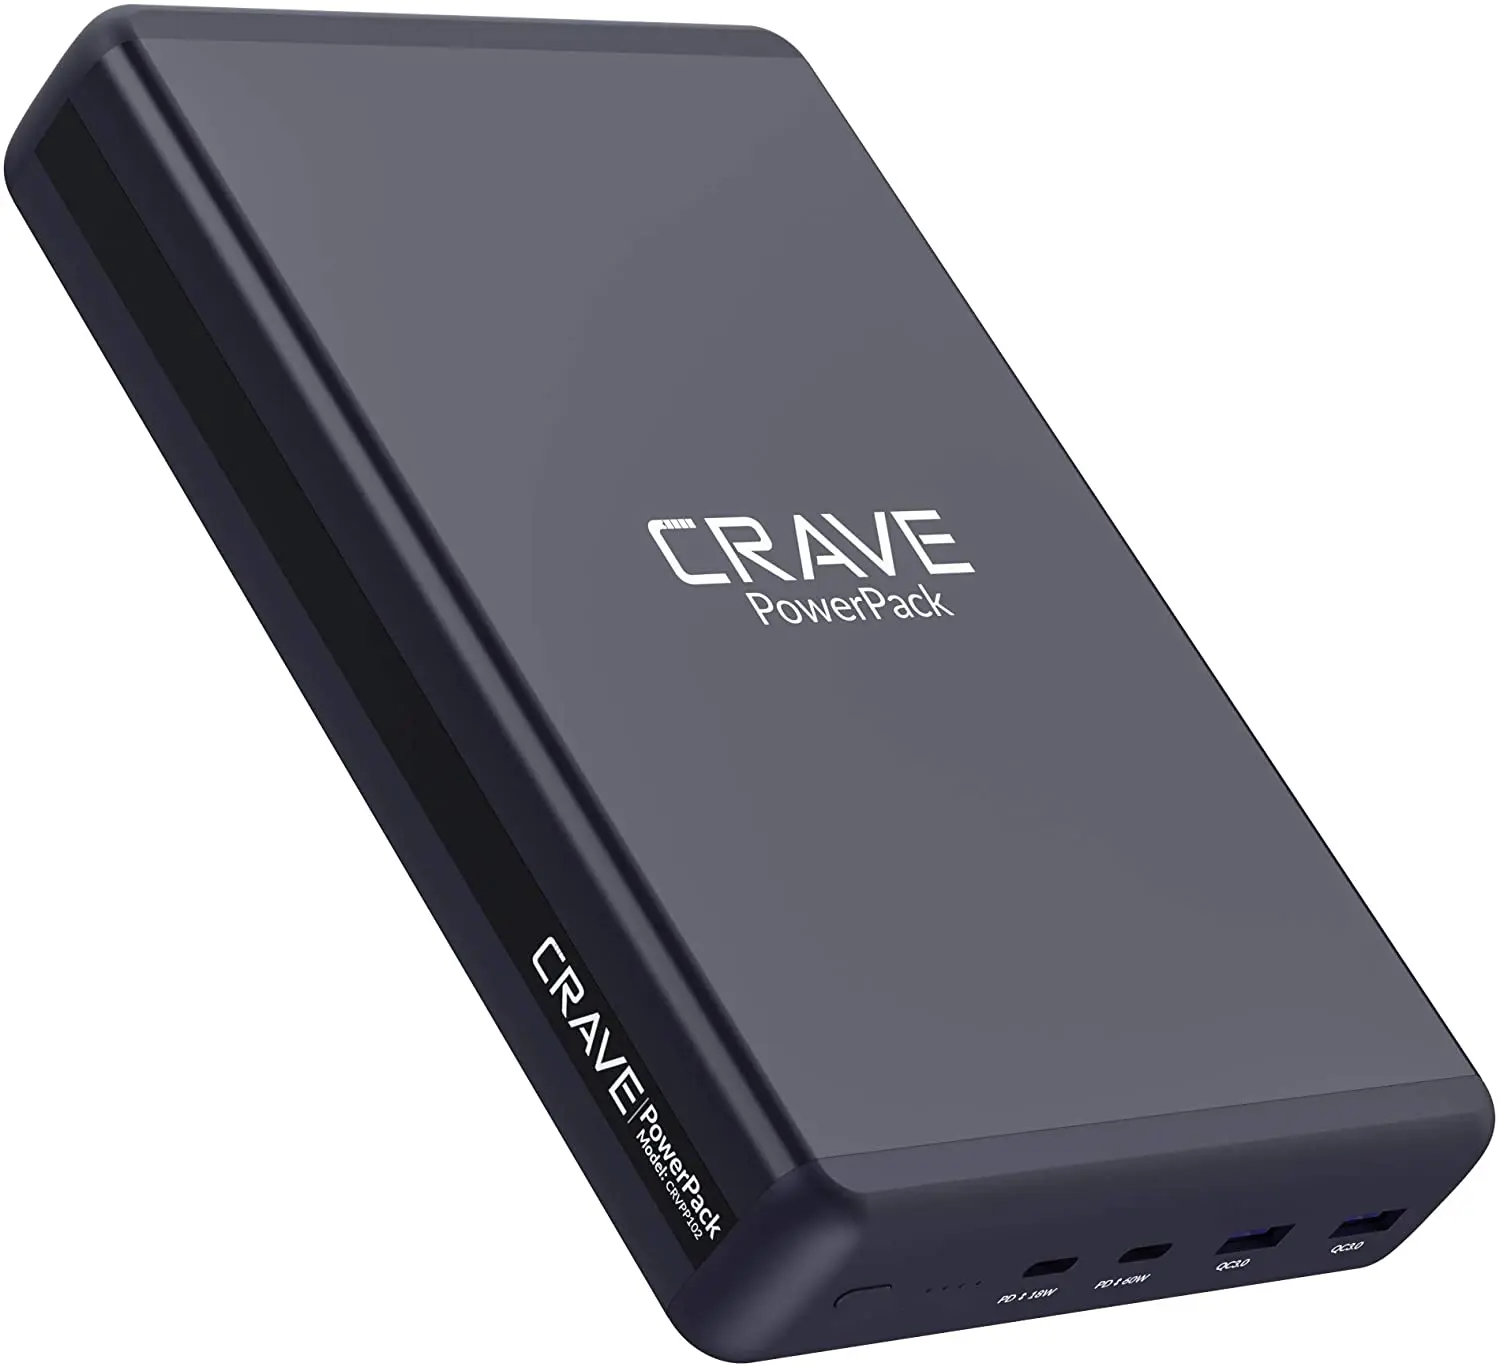 

PD Power Bank 50000mAh, Crave PowerPack Portable Battery Pack Charger [Power Delivery PD 3.0 USB-C 60W + Quick Charge QC 3.0